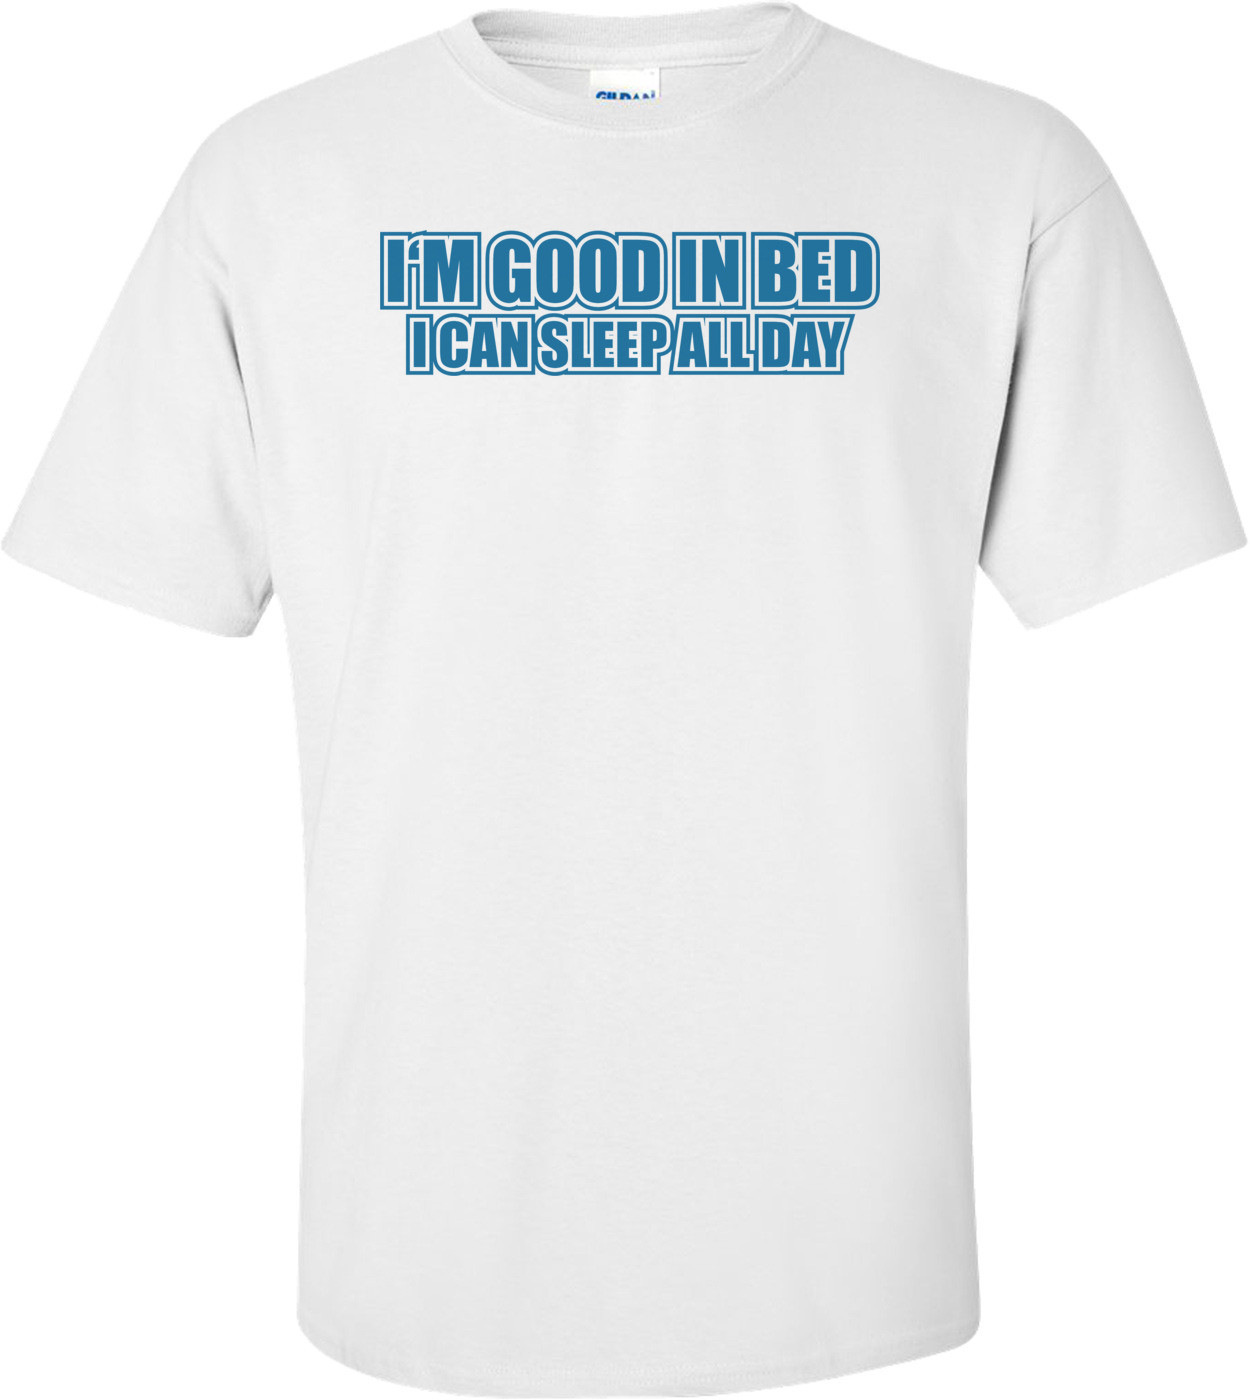 I'm Good In Bed I Can Sleep All Day T-shirt